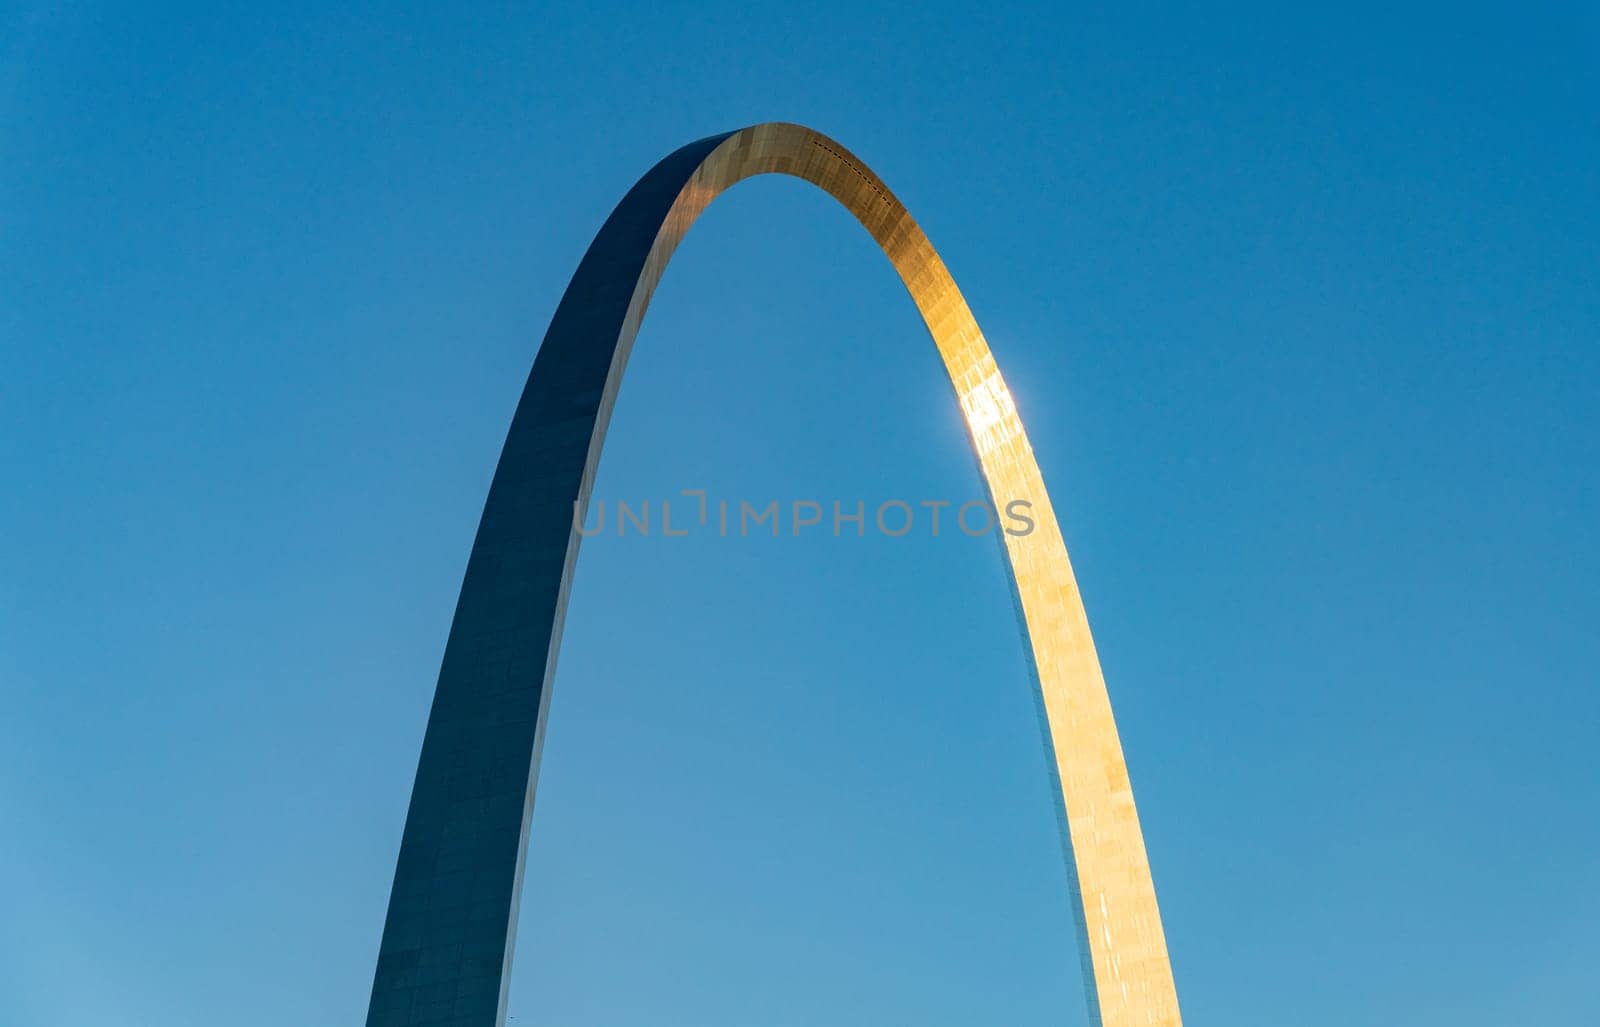 Simple abstract view of the Gateway Arch in St Louis at sunrise set against a plain blue sky